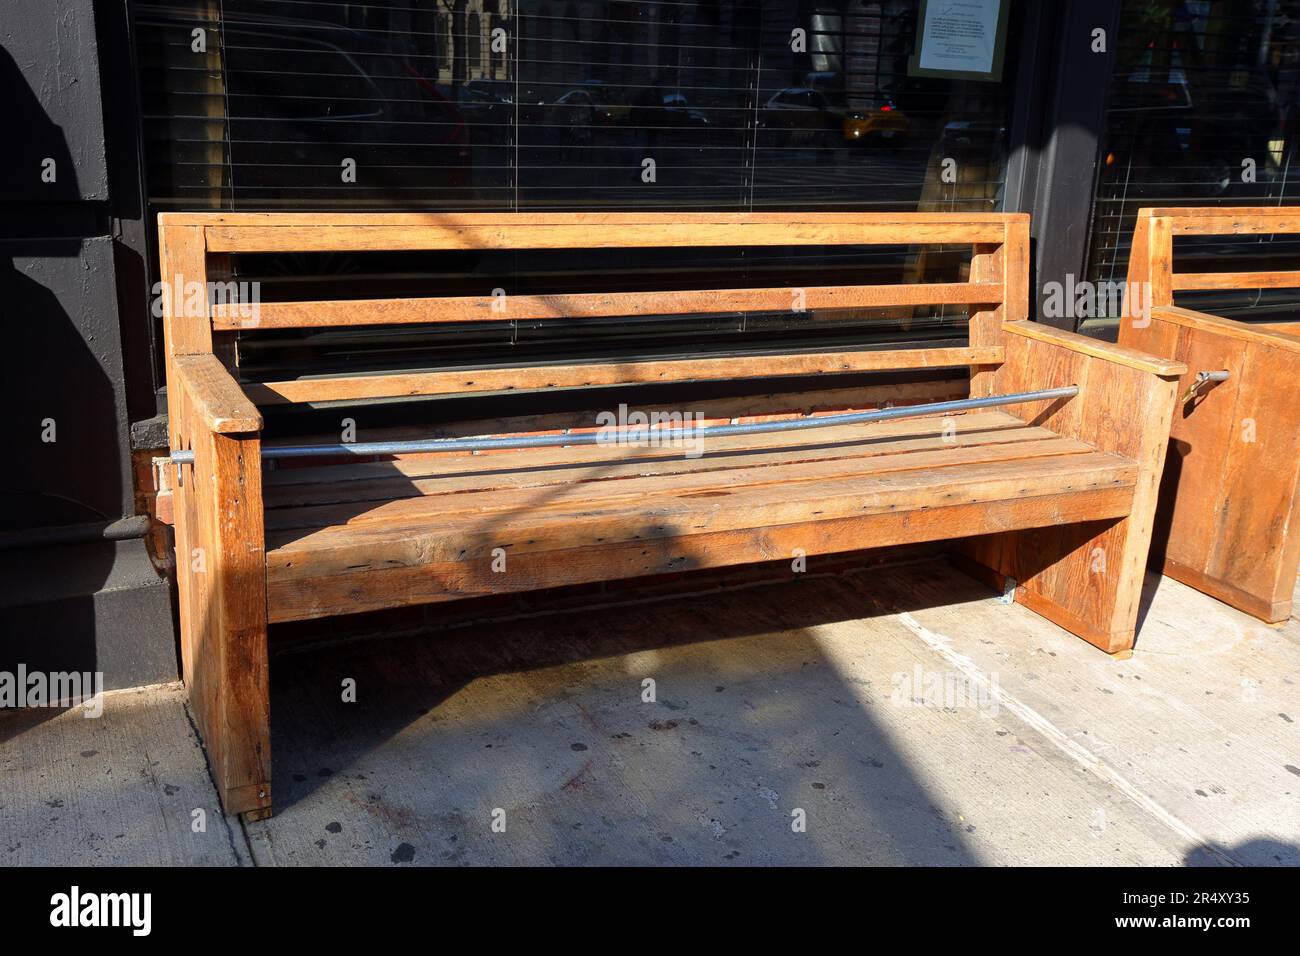 A piece of electrical metallic tubing placed across a bench to deter sitting and sleeping on a wooden bench outside a restaurant. hostile architecture Stock Photo